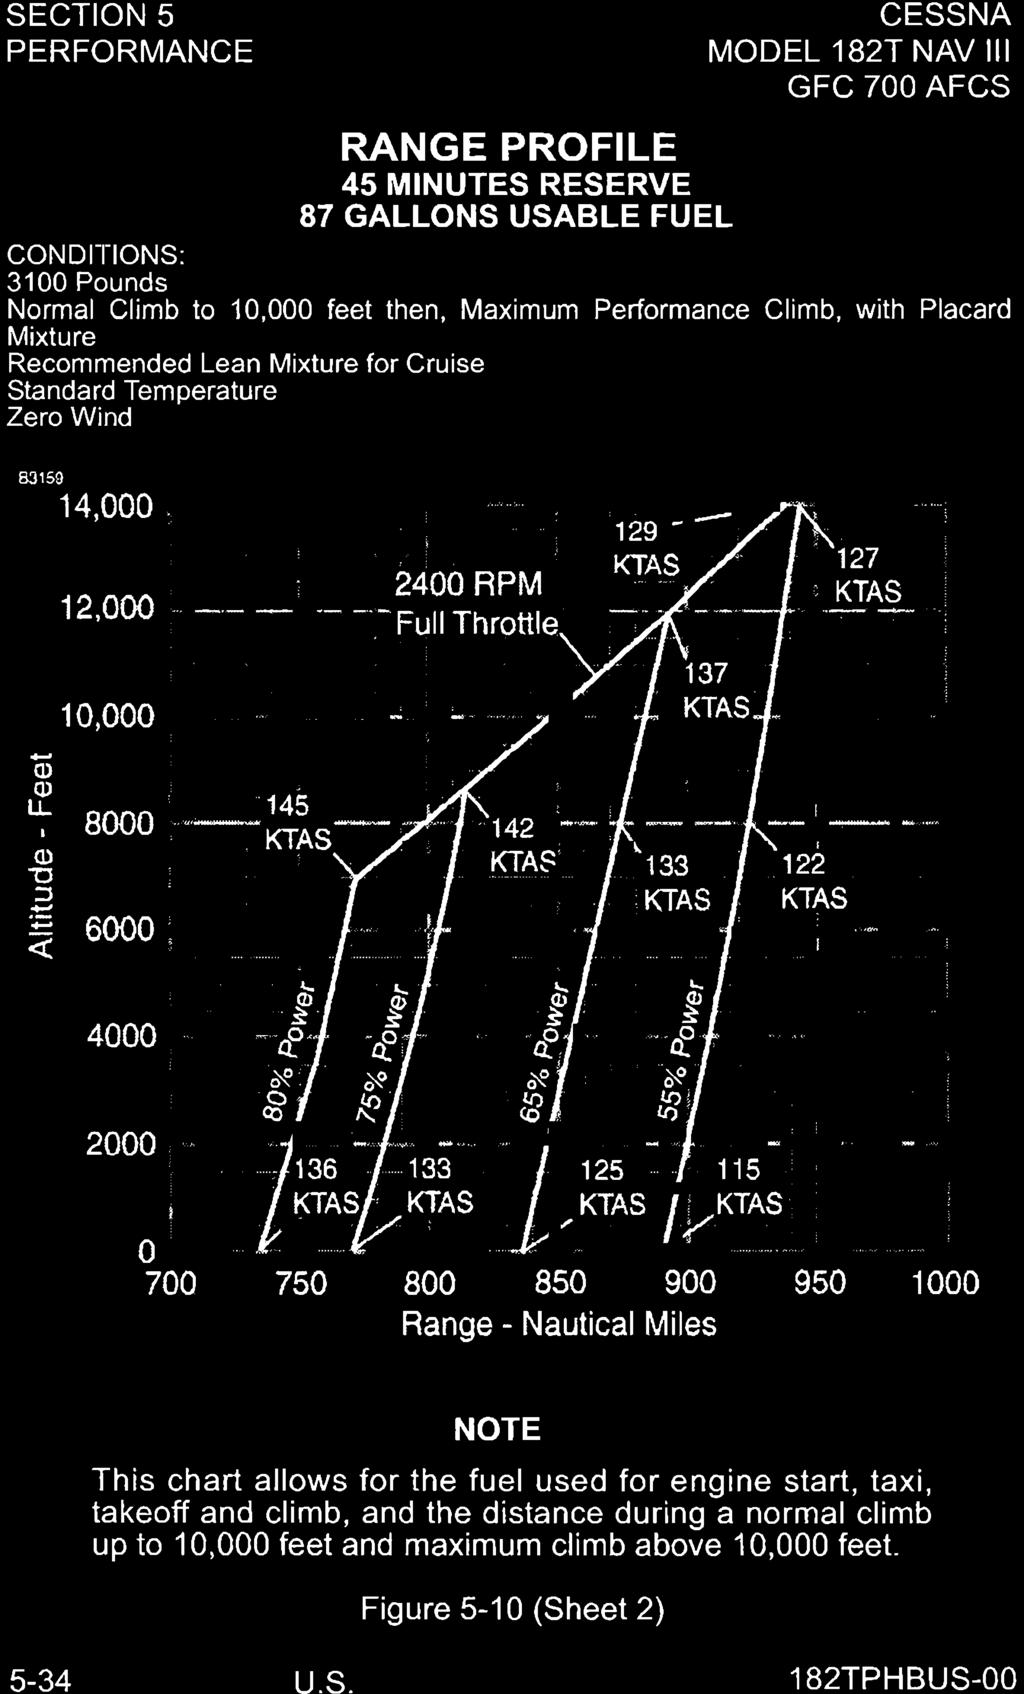 Q) "0 ;:) -:;:::; ~ 10,000 8000 6000 4000 2000 o 700 750 800 850 900 Range - Nautical Miles 950 1000 NOTE This chart allows for the fuel used for engine